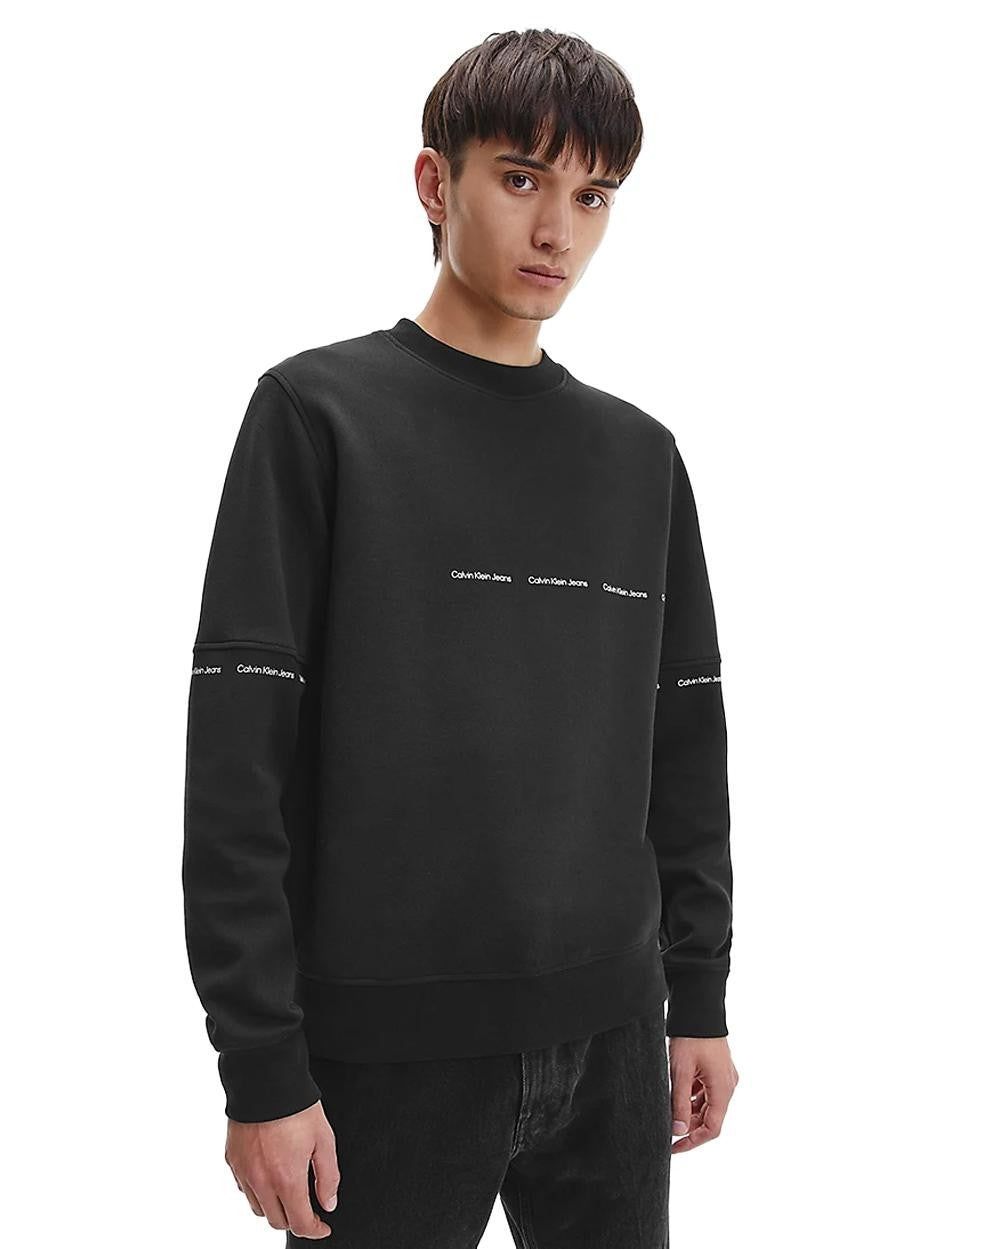 Brand: Calvin Klein Jeans Gender: Men Type: Sweatshirts Season: Spring/Summer  PRODUCT DETAIL • Color: black • Pattern: print • Sleeves: long • Neckline: round neck  COMPOSITION AND MATERIAL • Composition: -64% cotton -36% polyester  •  Washing: machine wash at 30° -64% Cotton -36% Polyester